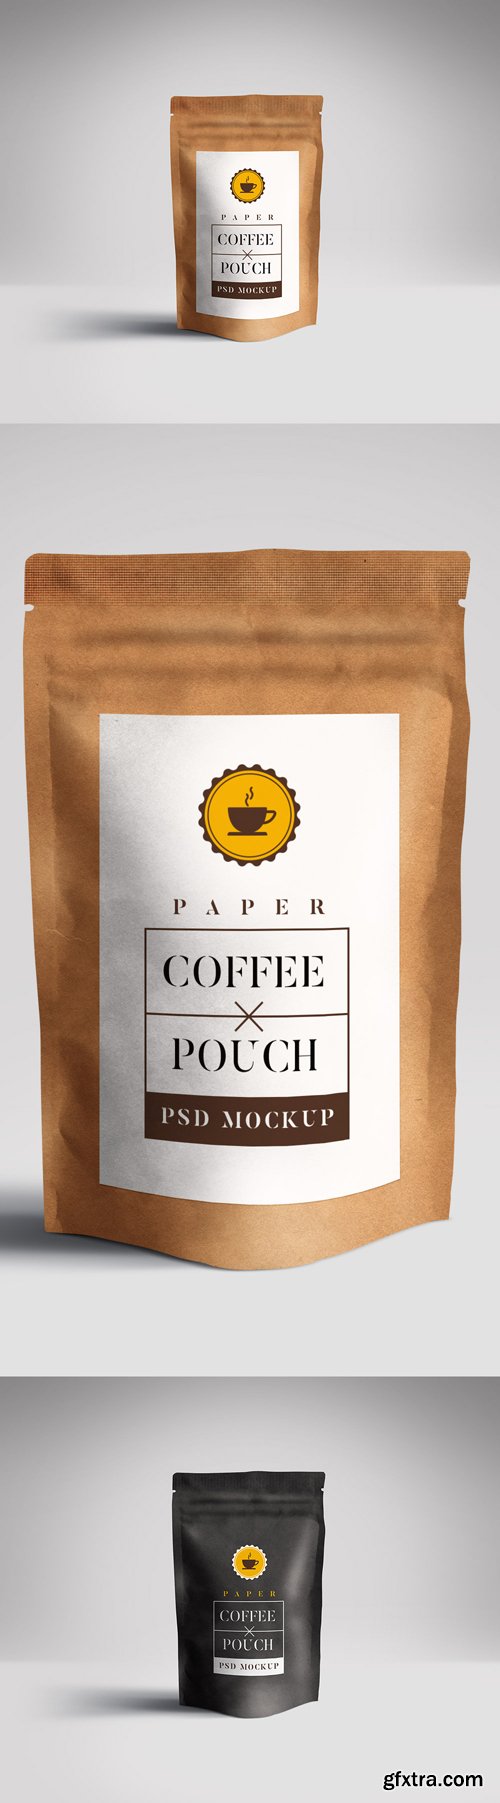 Coffee Pouch Packaging Mockup